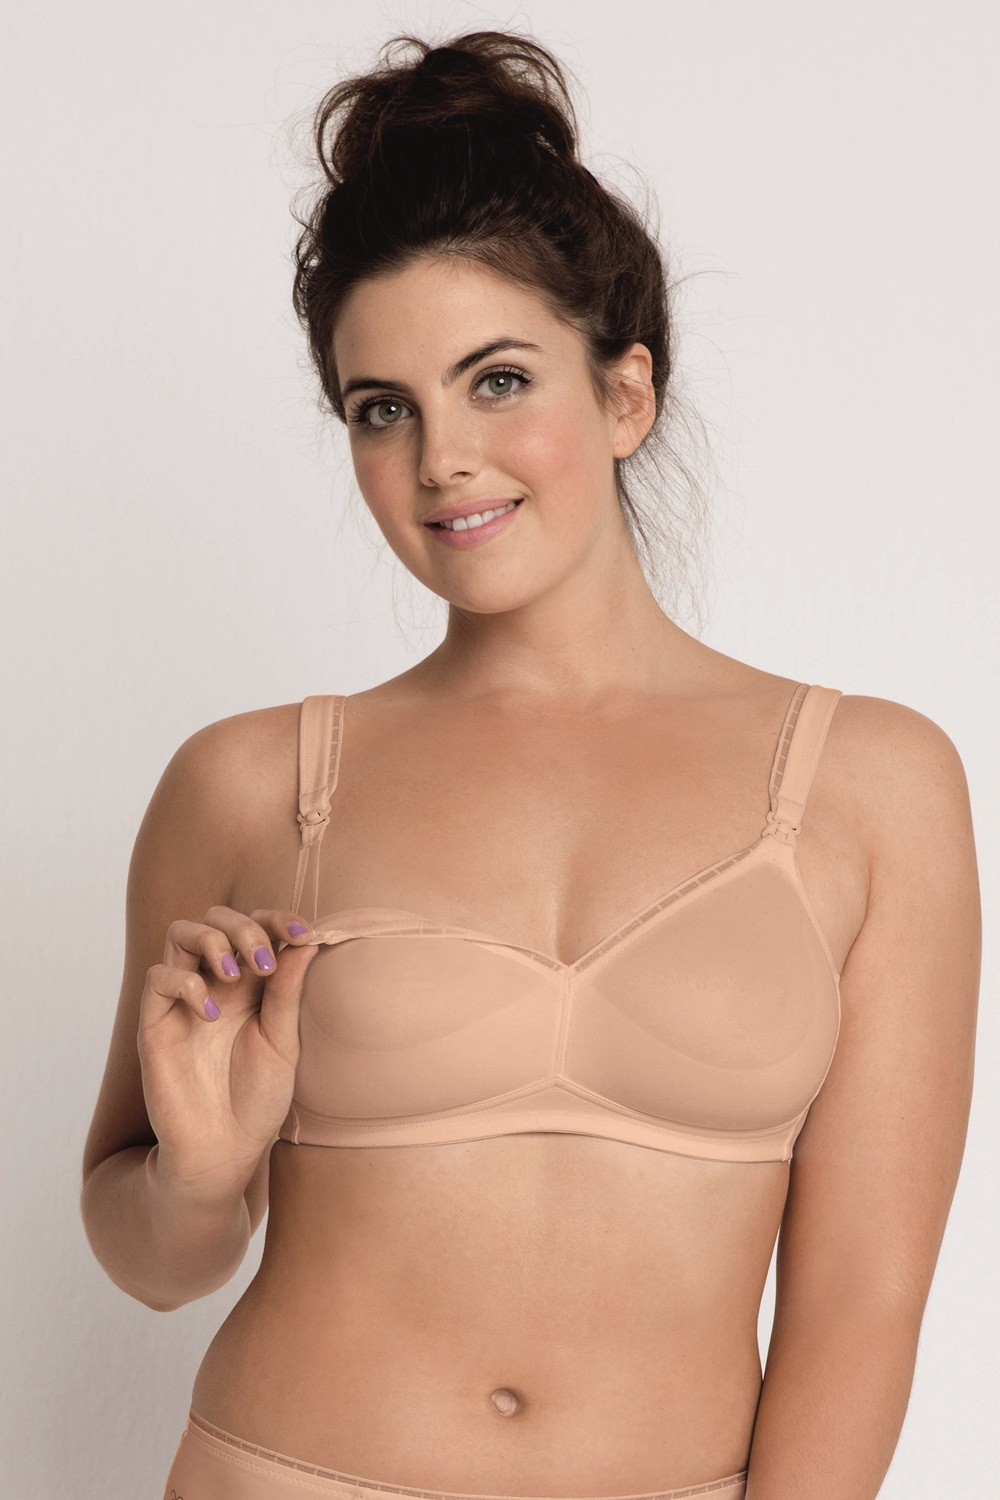 Nonwired nursing bra made of fine microfiber. Soft cups without